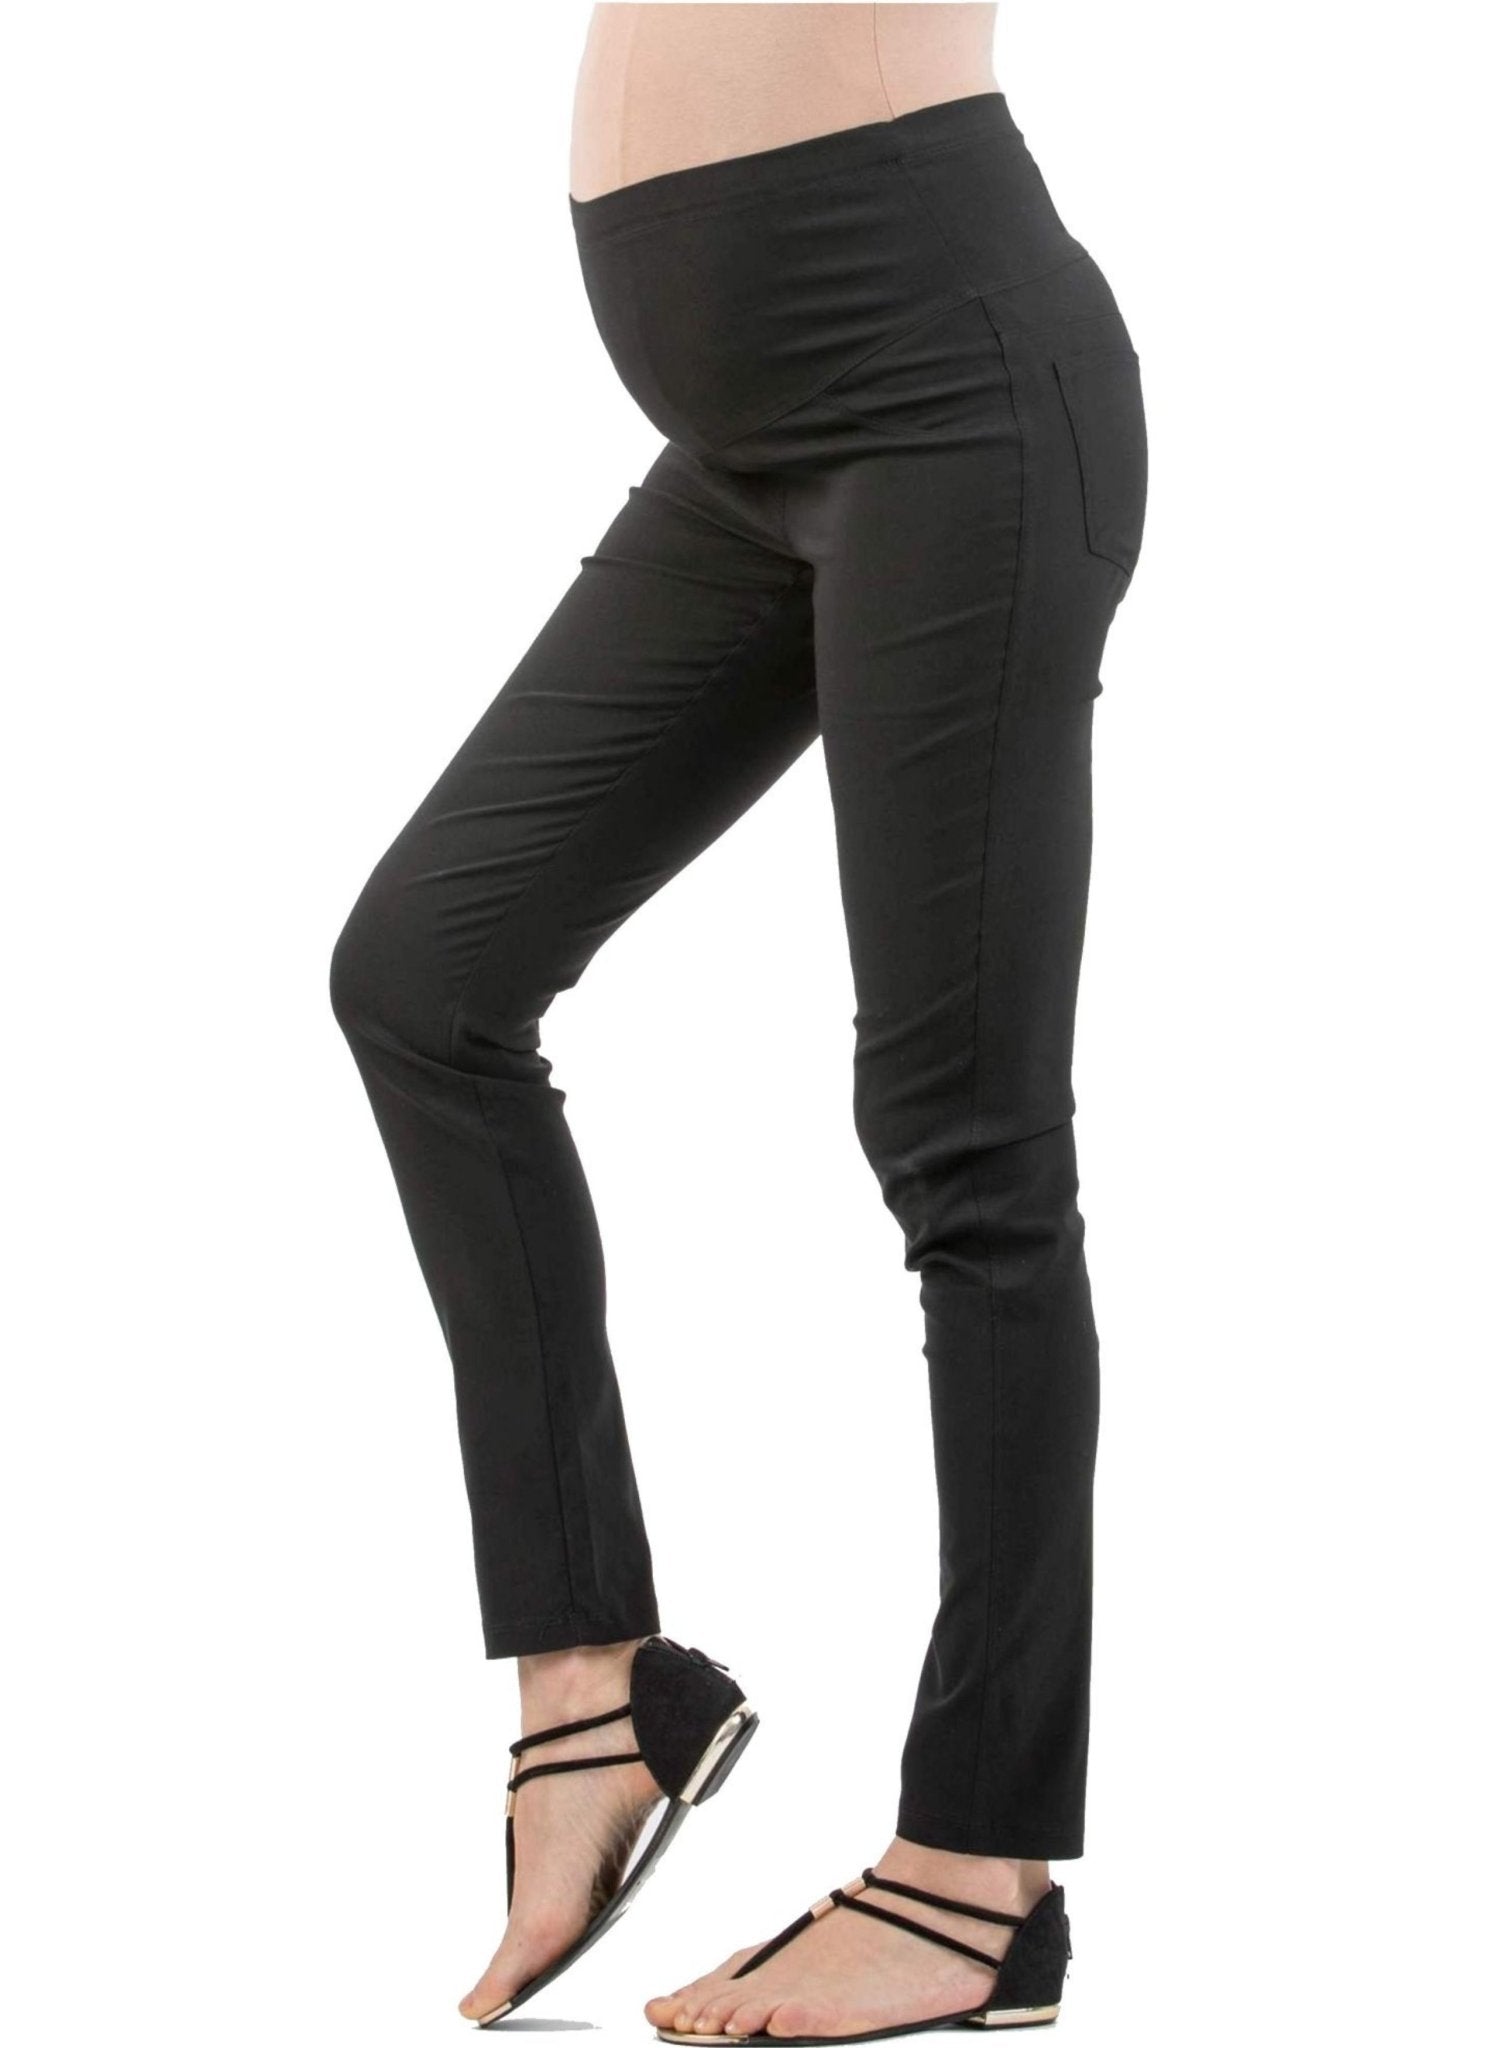 Super Comfortable Maternity Trousers - Black - Mums and Bumps